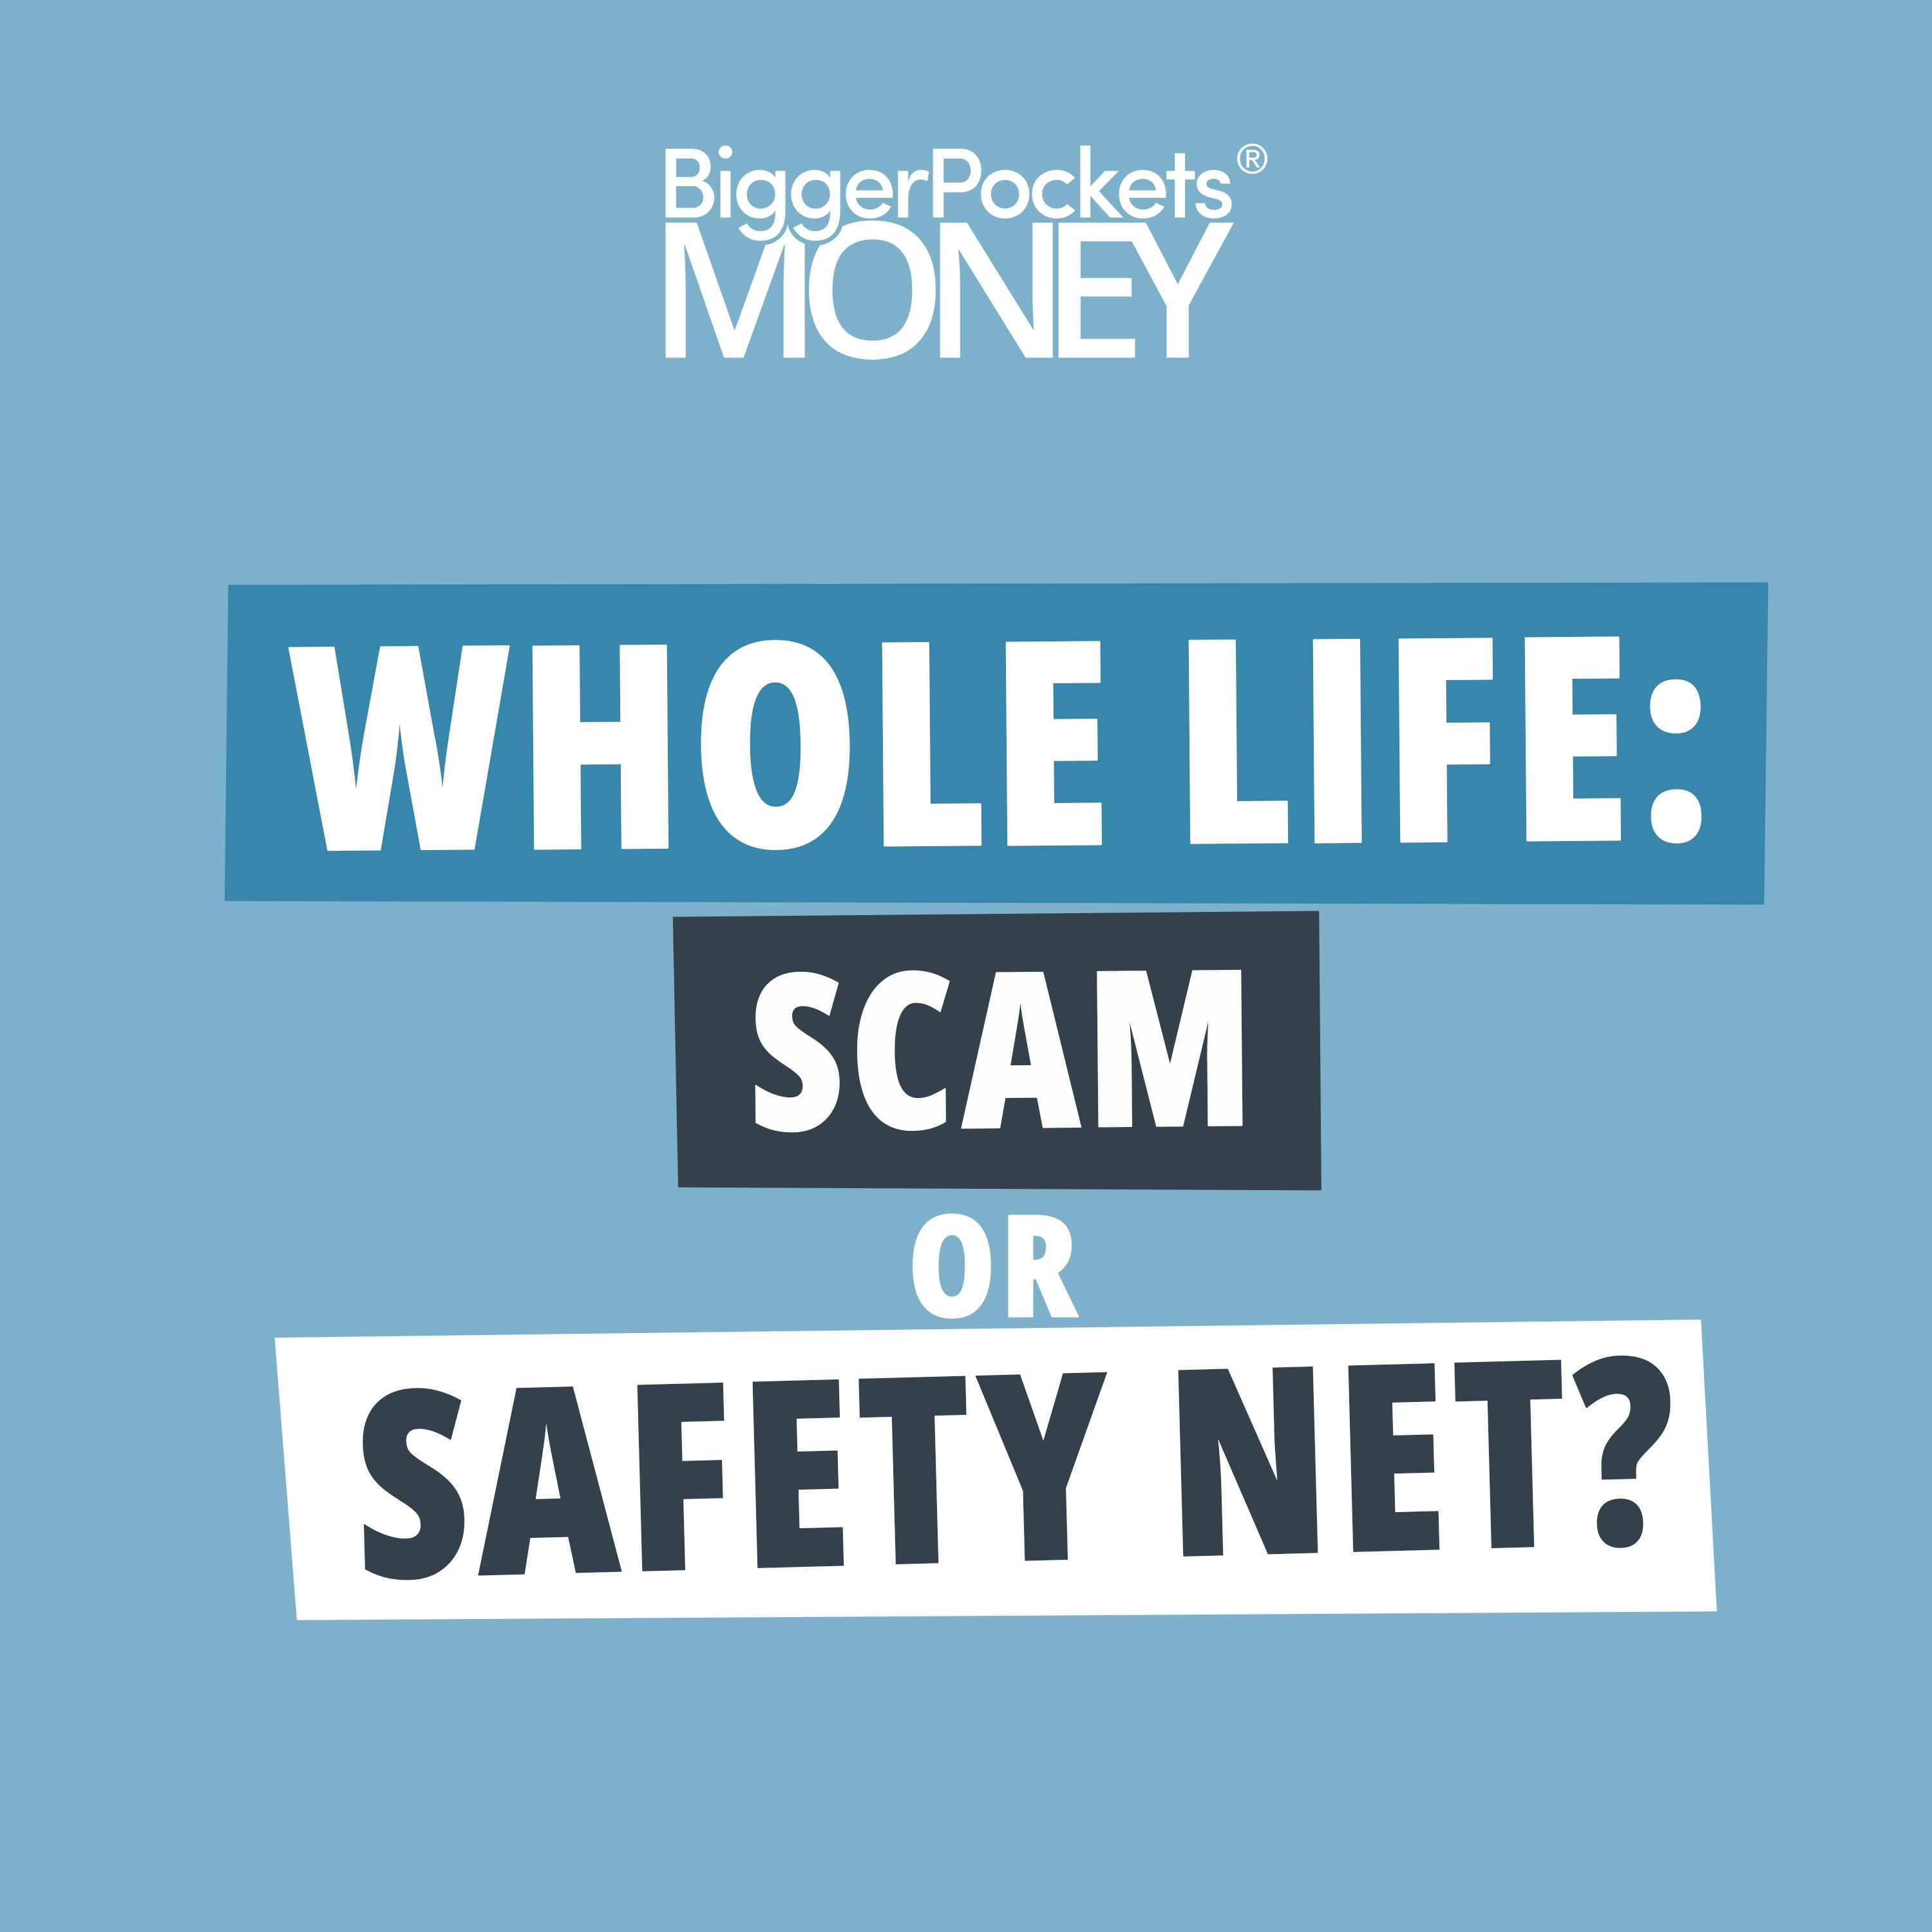 390: Why Your Whole Life Insurance (Probably) Won’t Ever Profit